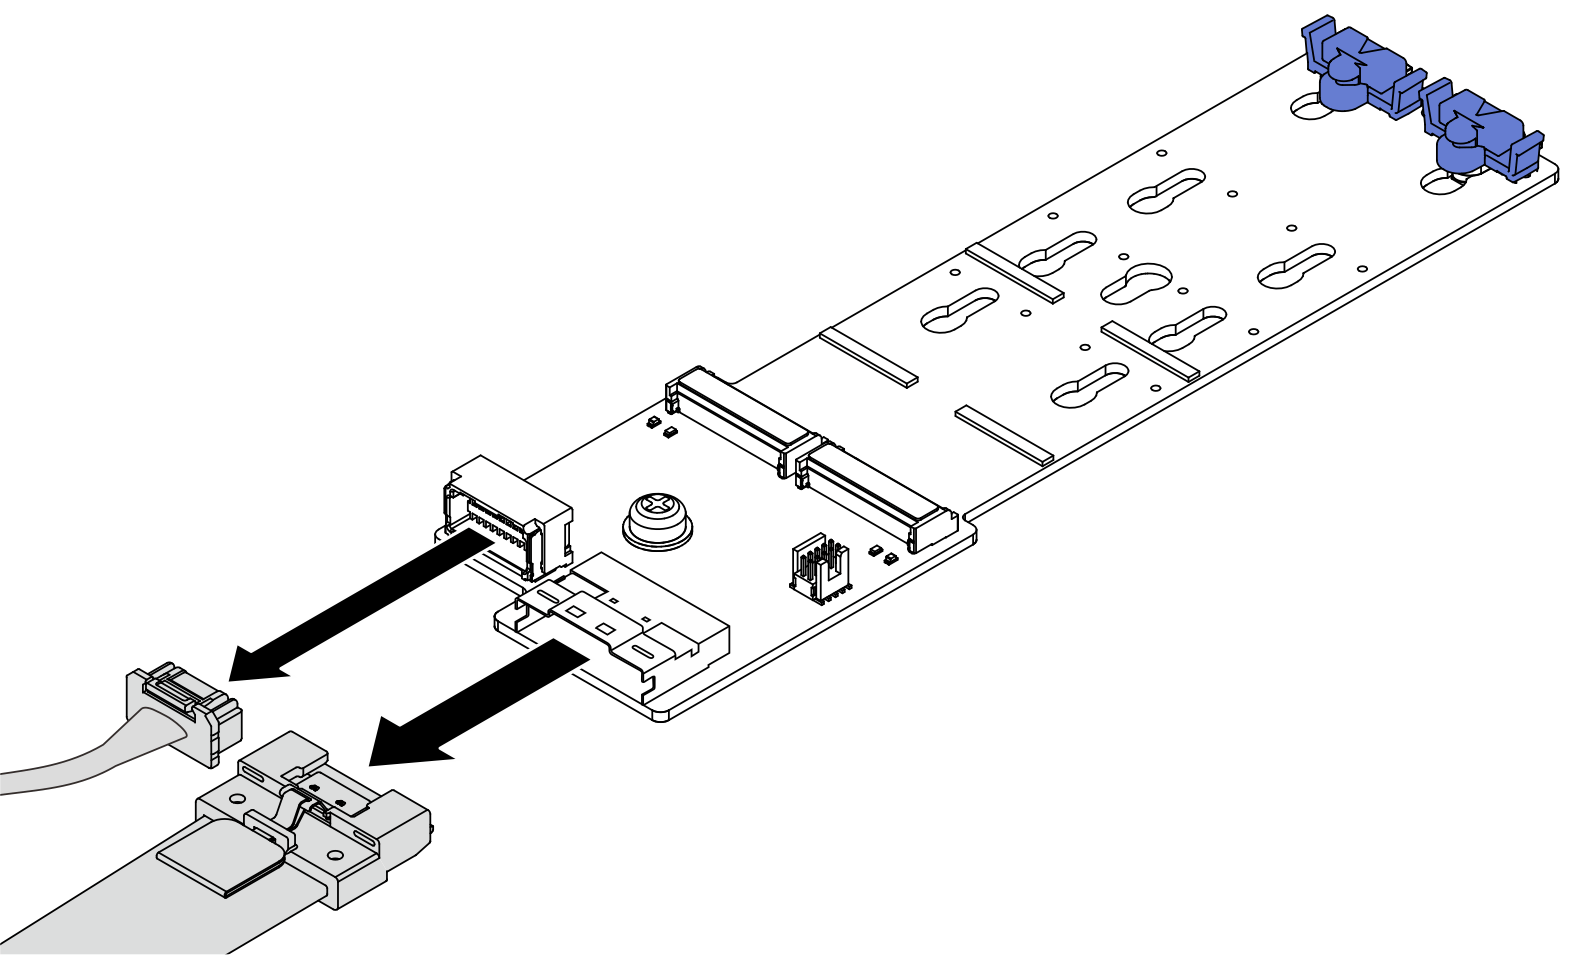 Disconnecting M.2 cables from M.2 backplane